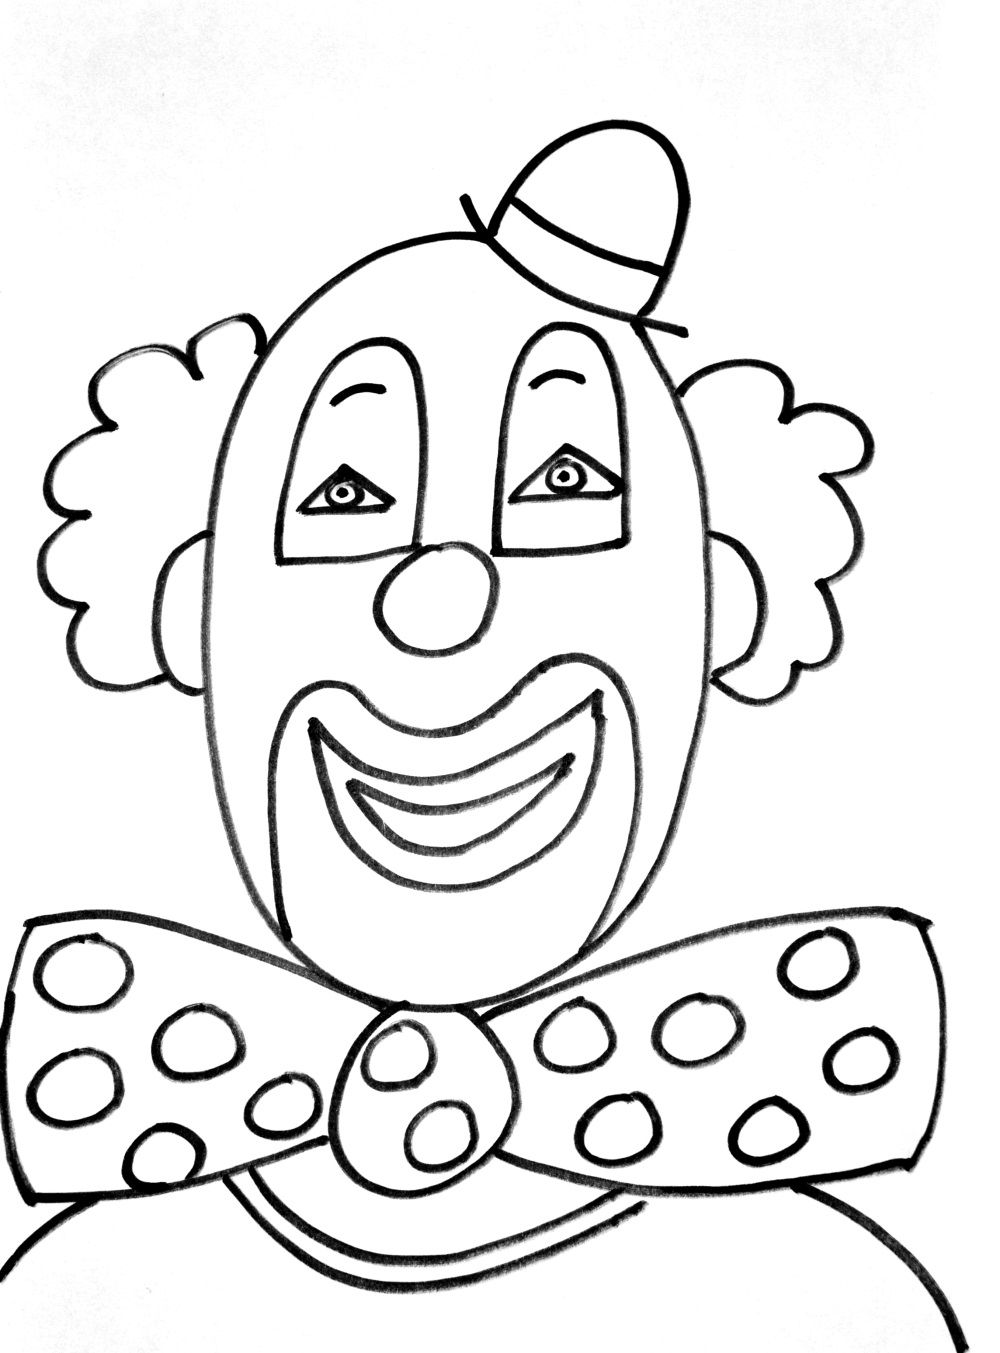 Clown Characters Printable Coloring Pages